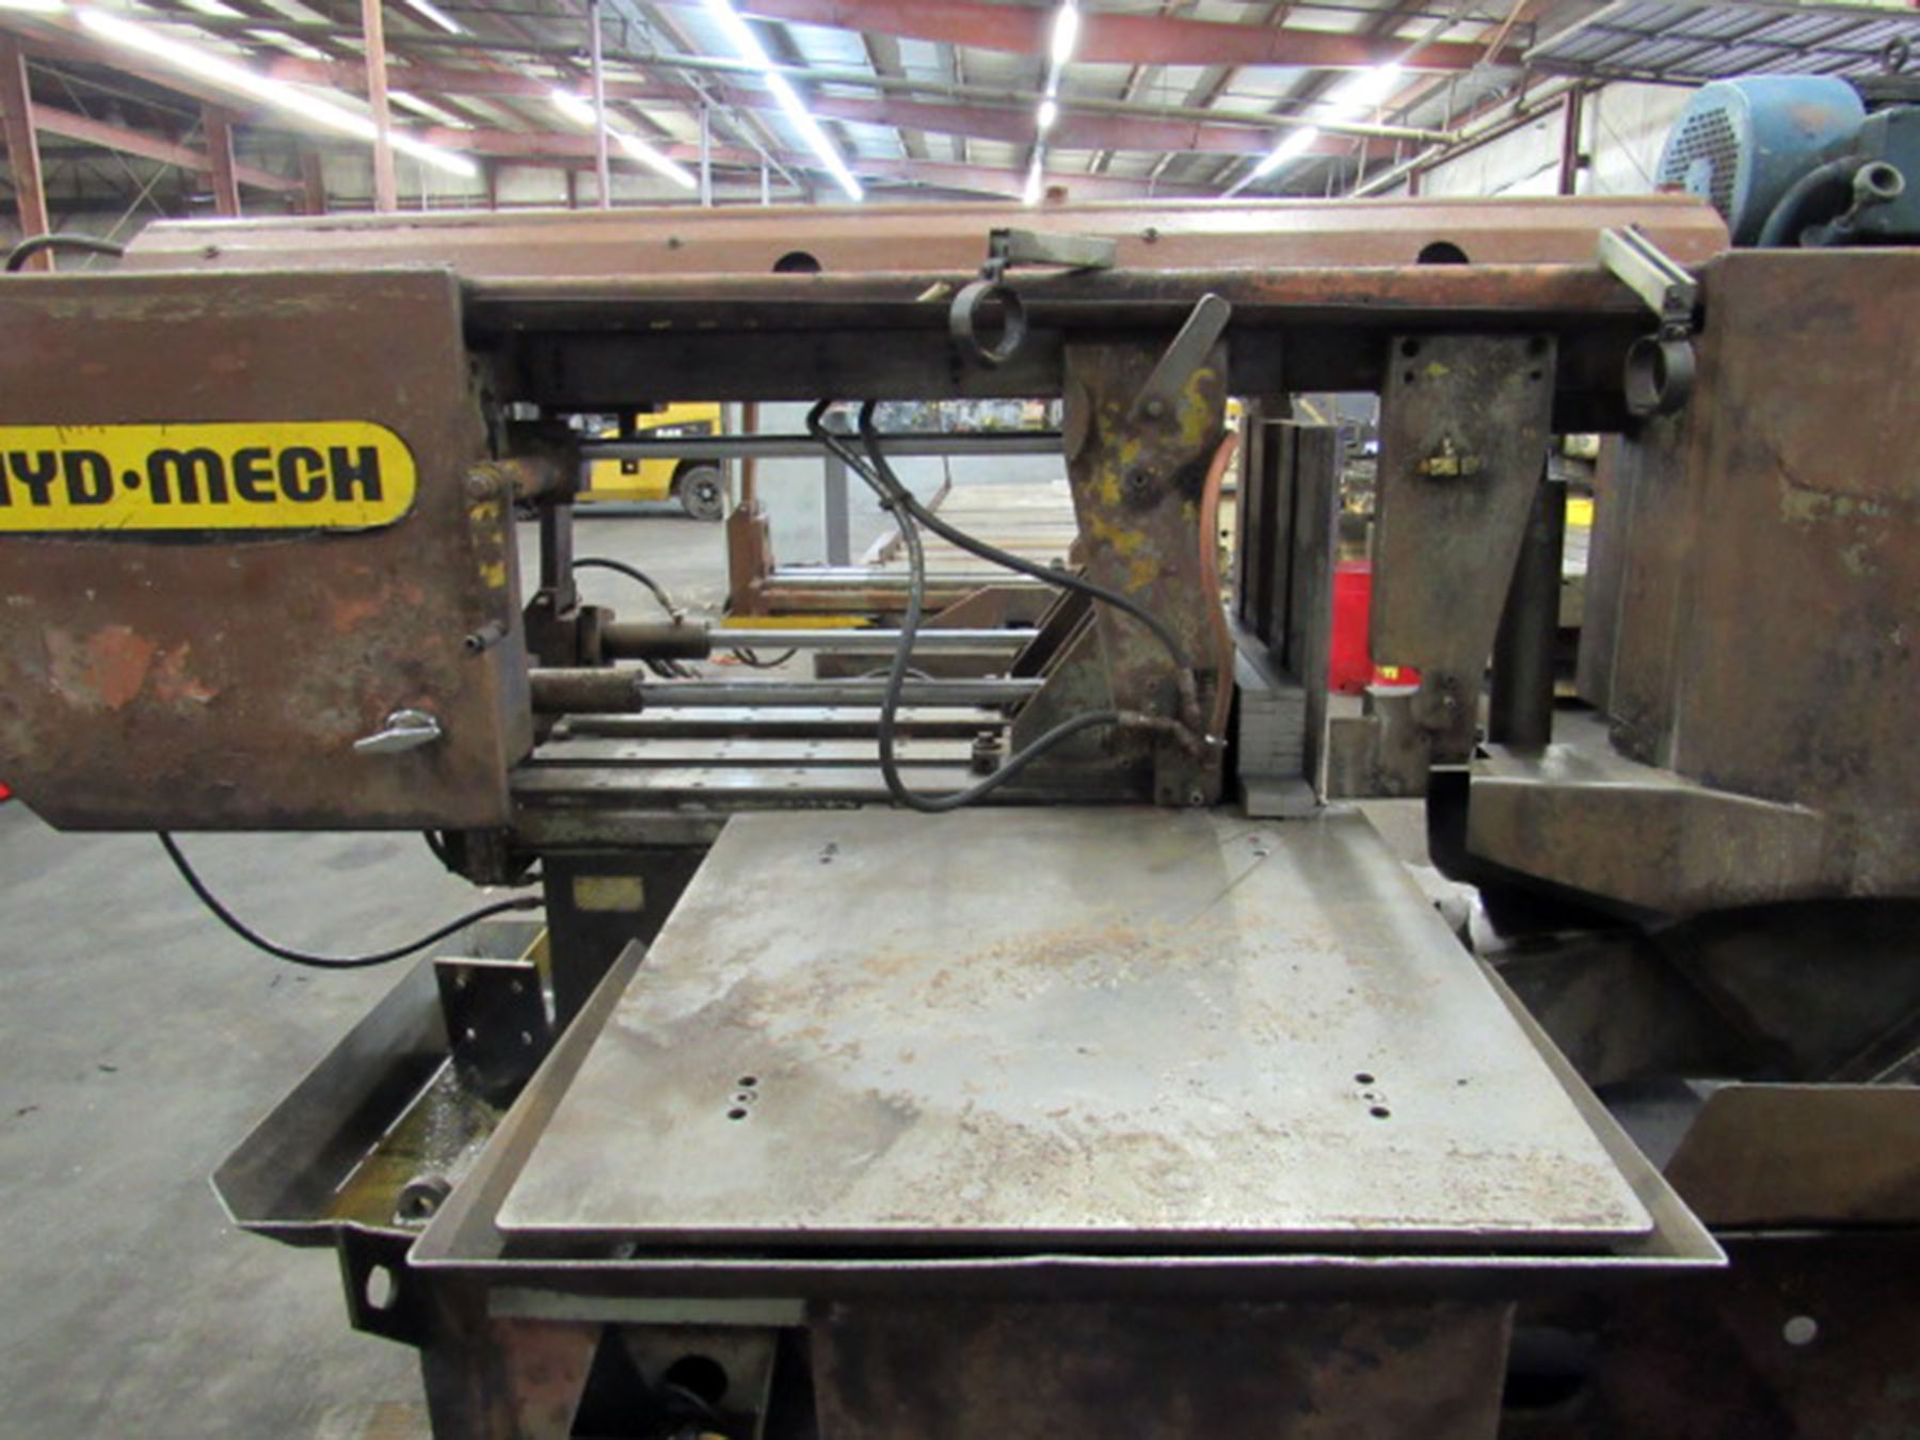 Hyd-Mech Model S-25A Mitering Automatic Horizontal Bandsaw - Image 3 of 9